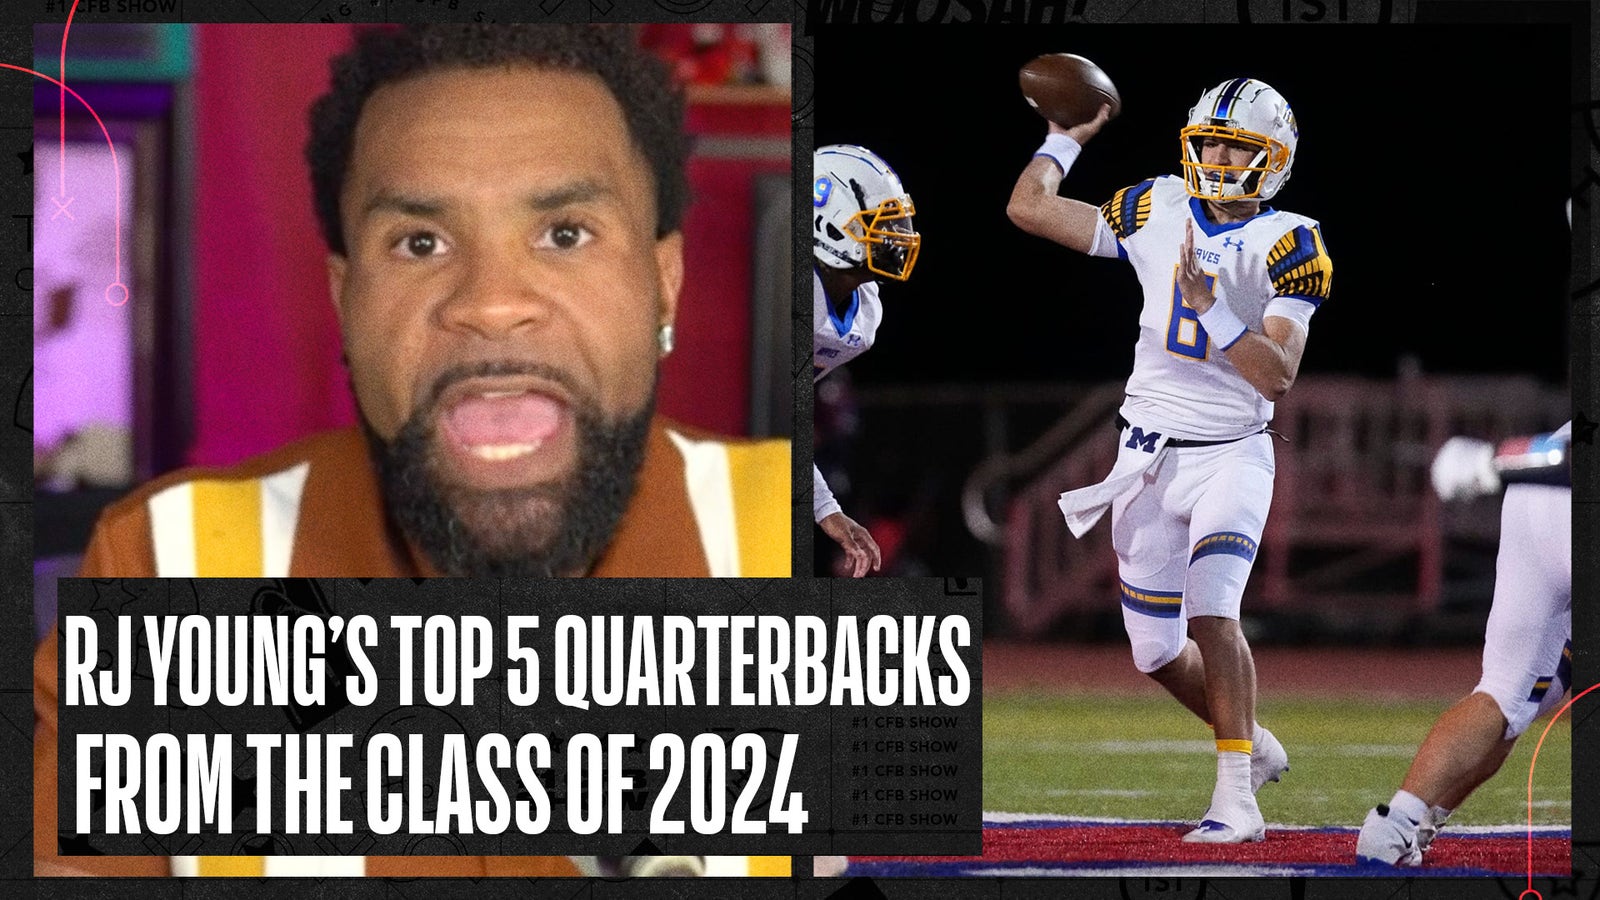 Ohio State and Georgia commits headline the top QBs in class of '24